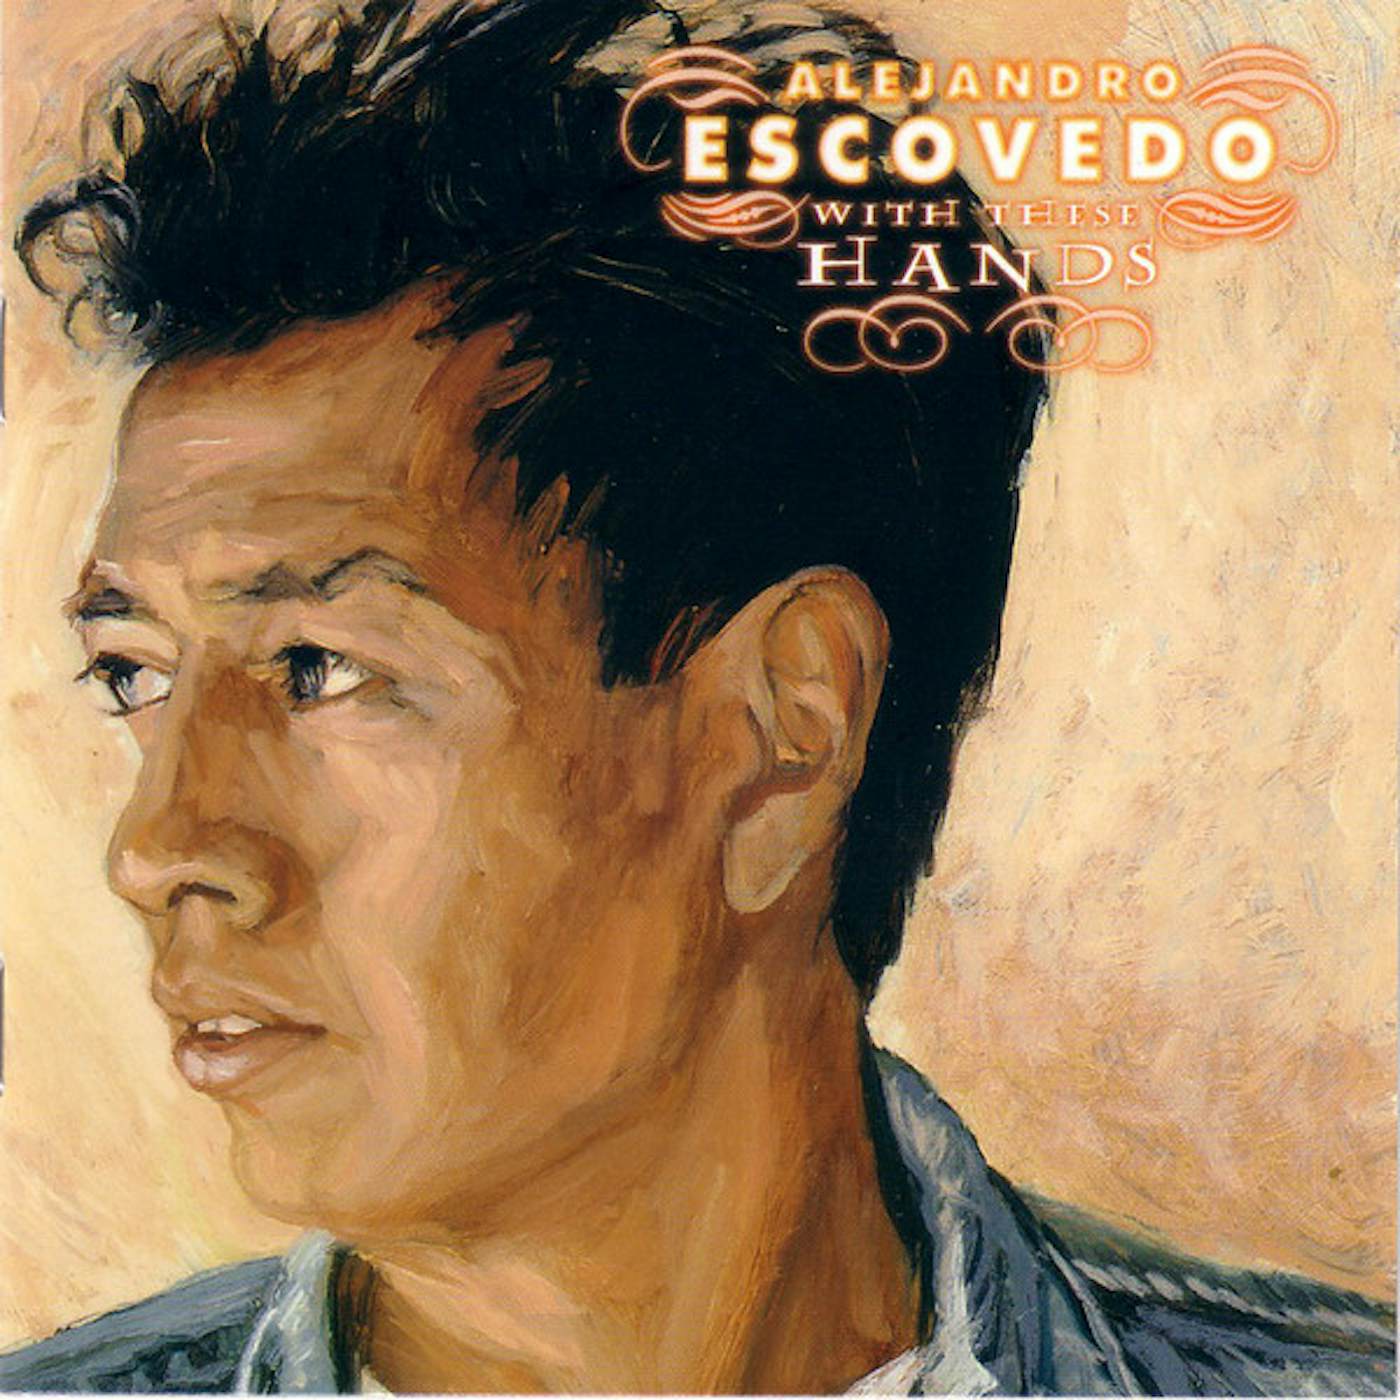 Alejandro Escovedo WITH THESE HANDS (180G) Vinyl Record